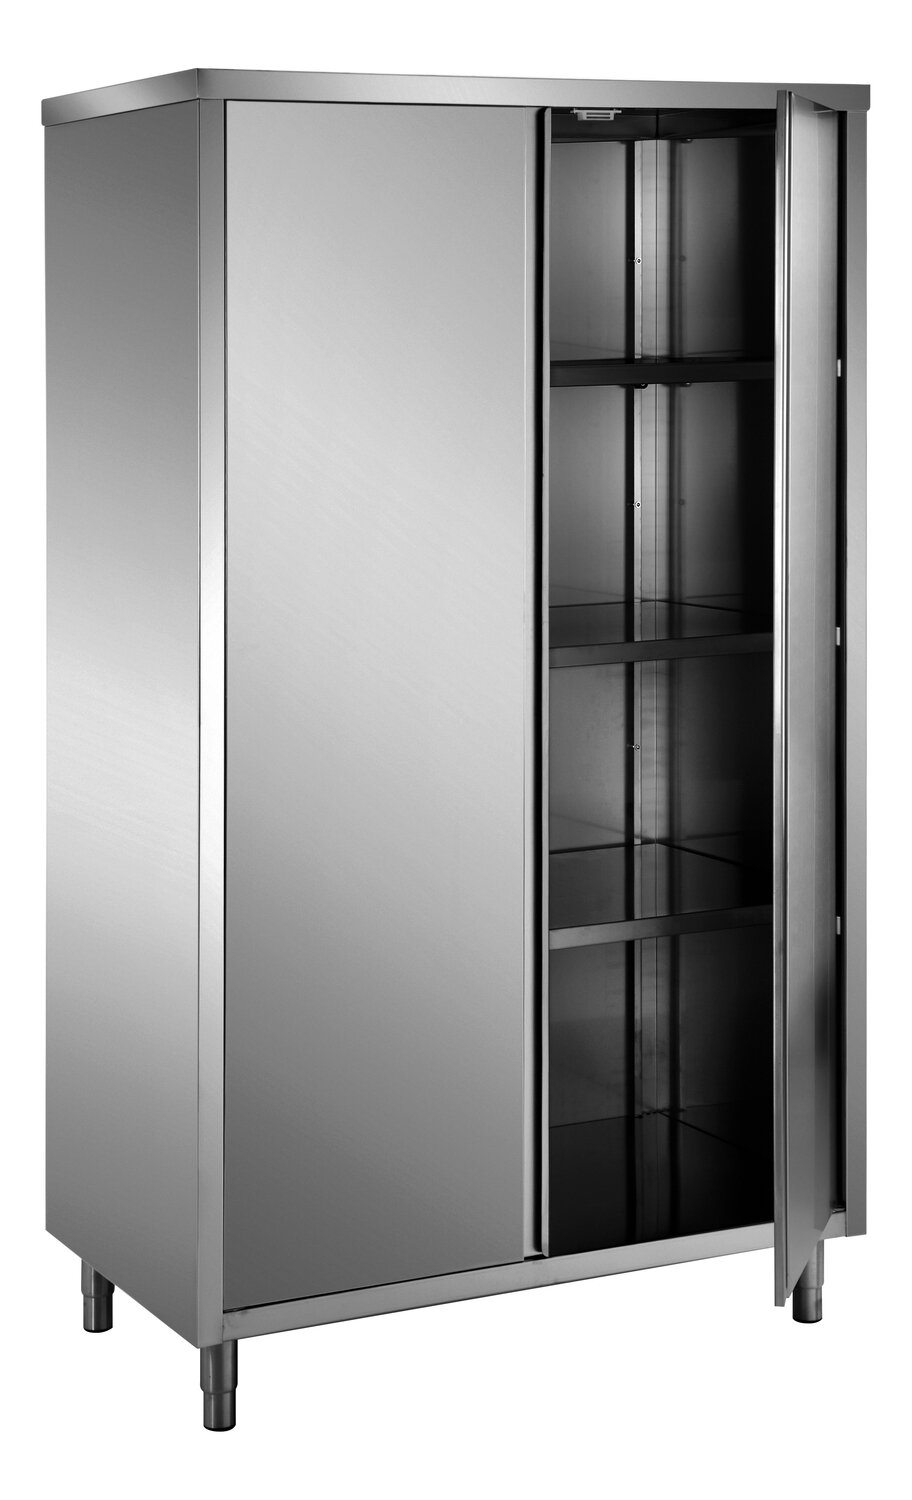 SARO Stainless steel storage cabinets with 2 hinged doors 1200x600 AISI 430